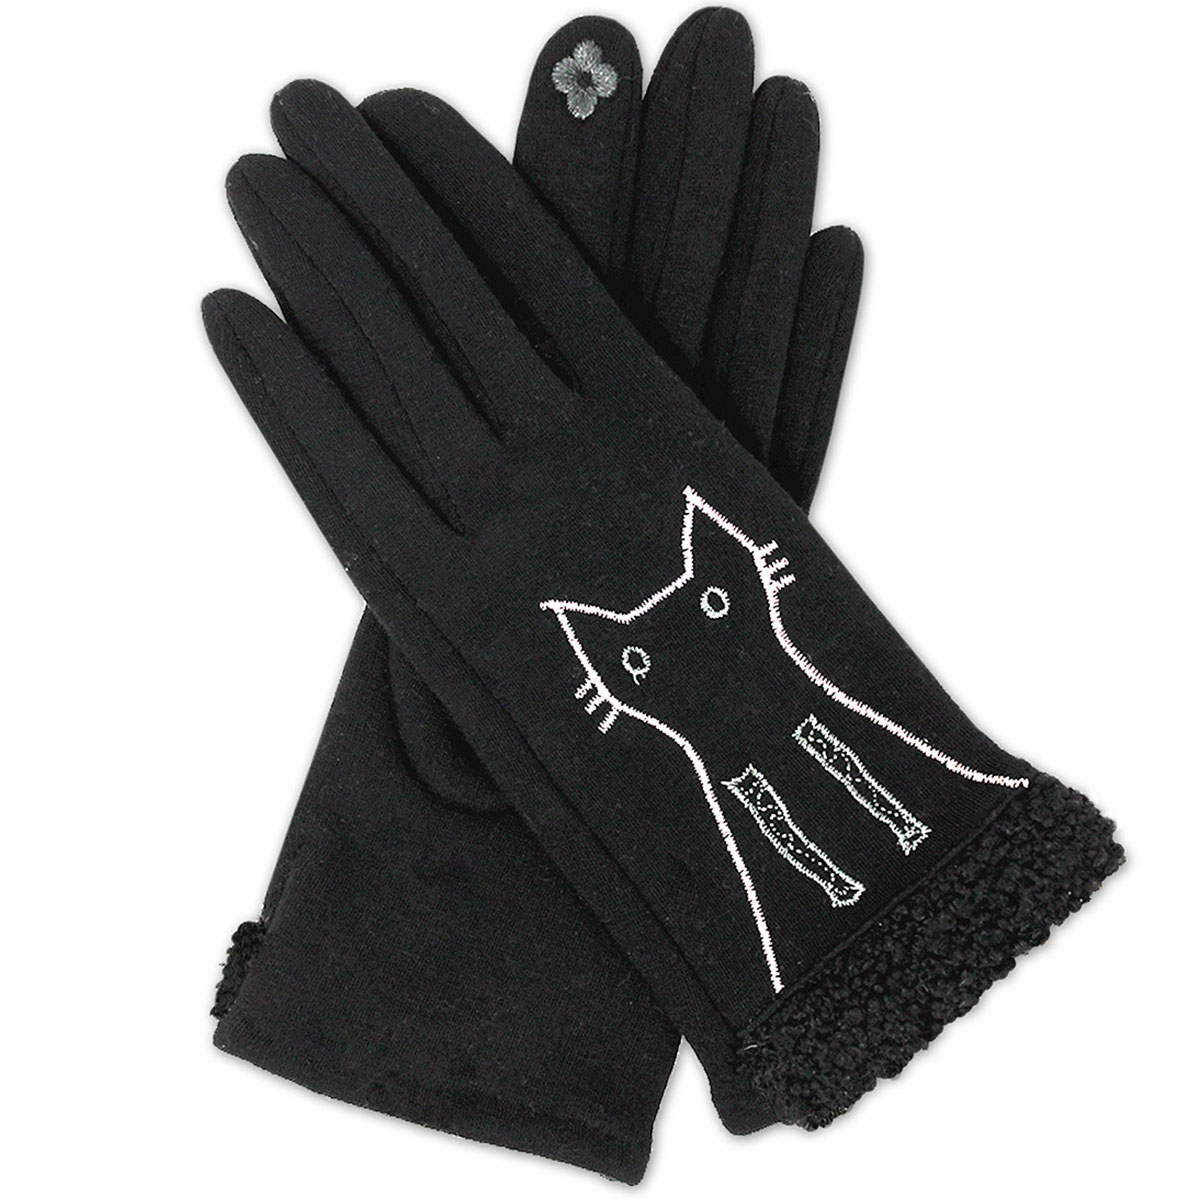 2390 - Touch Screen Smart Gloves 1225 - Red Cat Silhouette<br>
Touch Screen Smart Gloves - One Size Fits Most